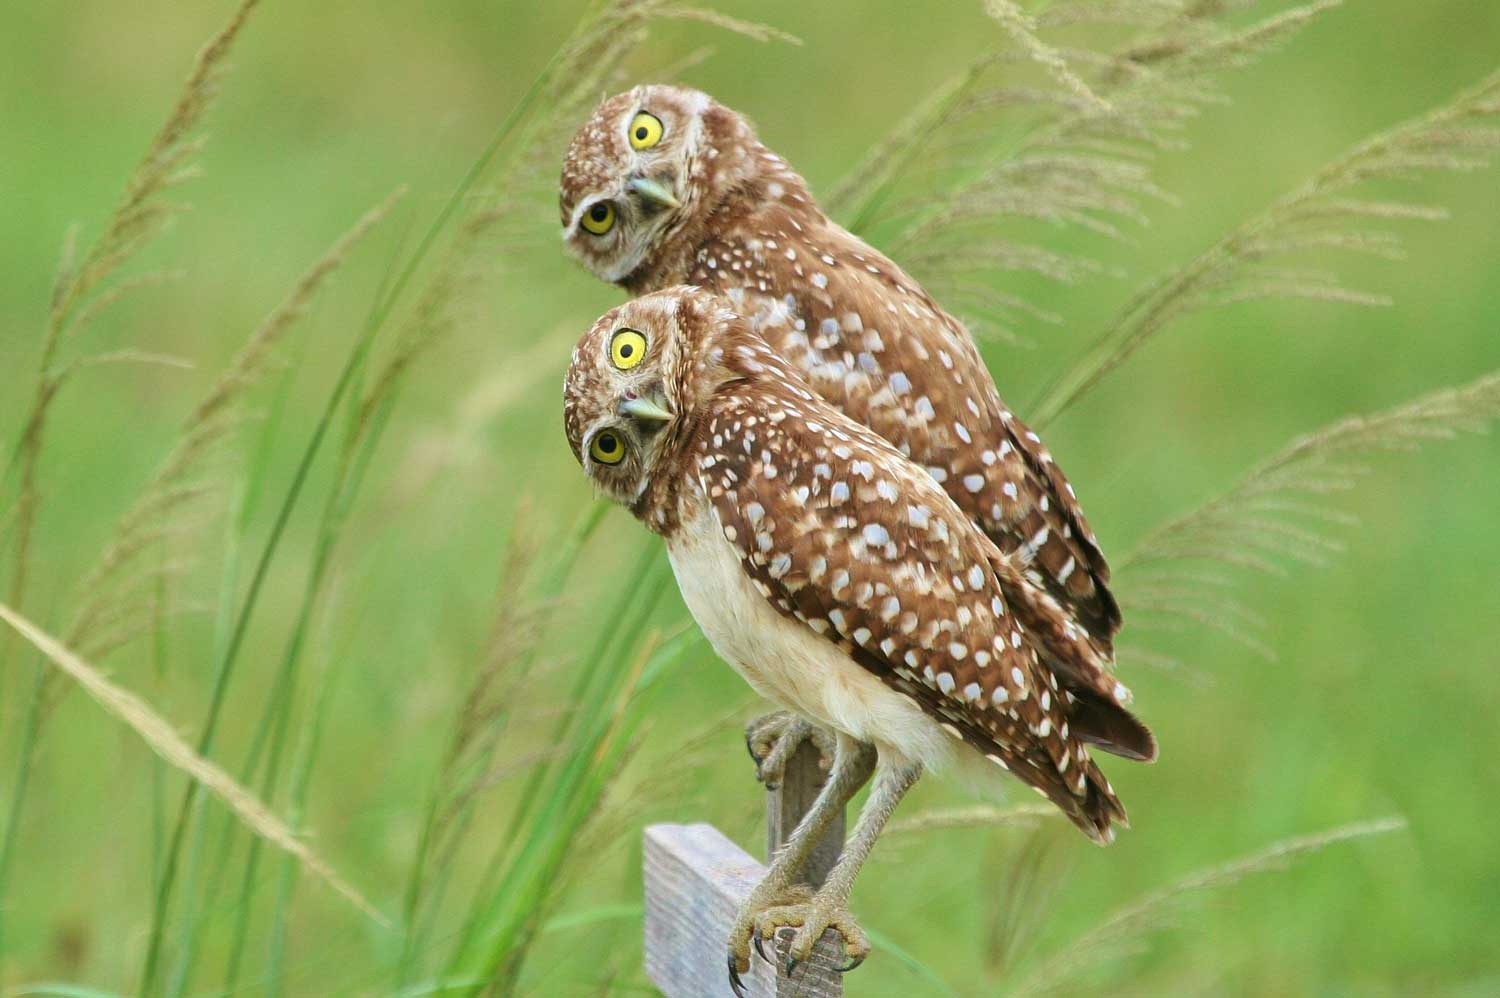 The hooting past. Re-evaluating the role of owls in shaping human